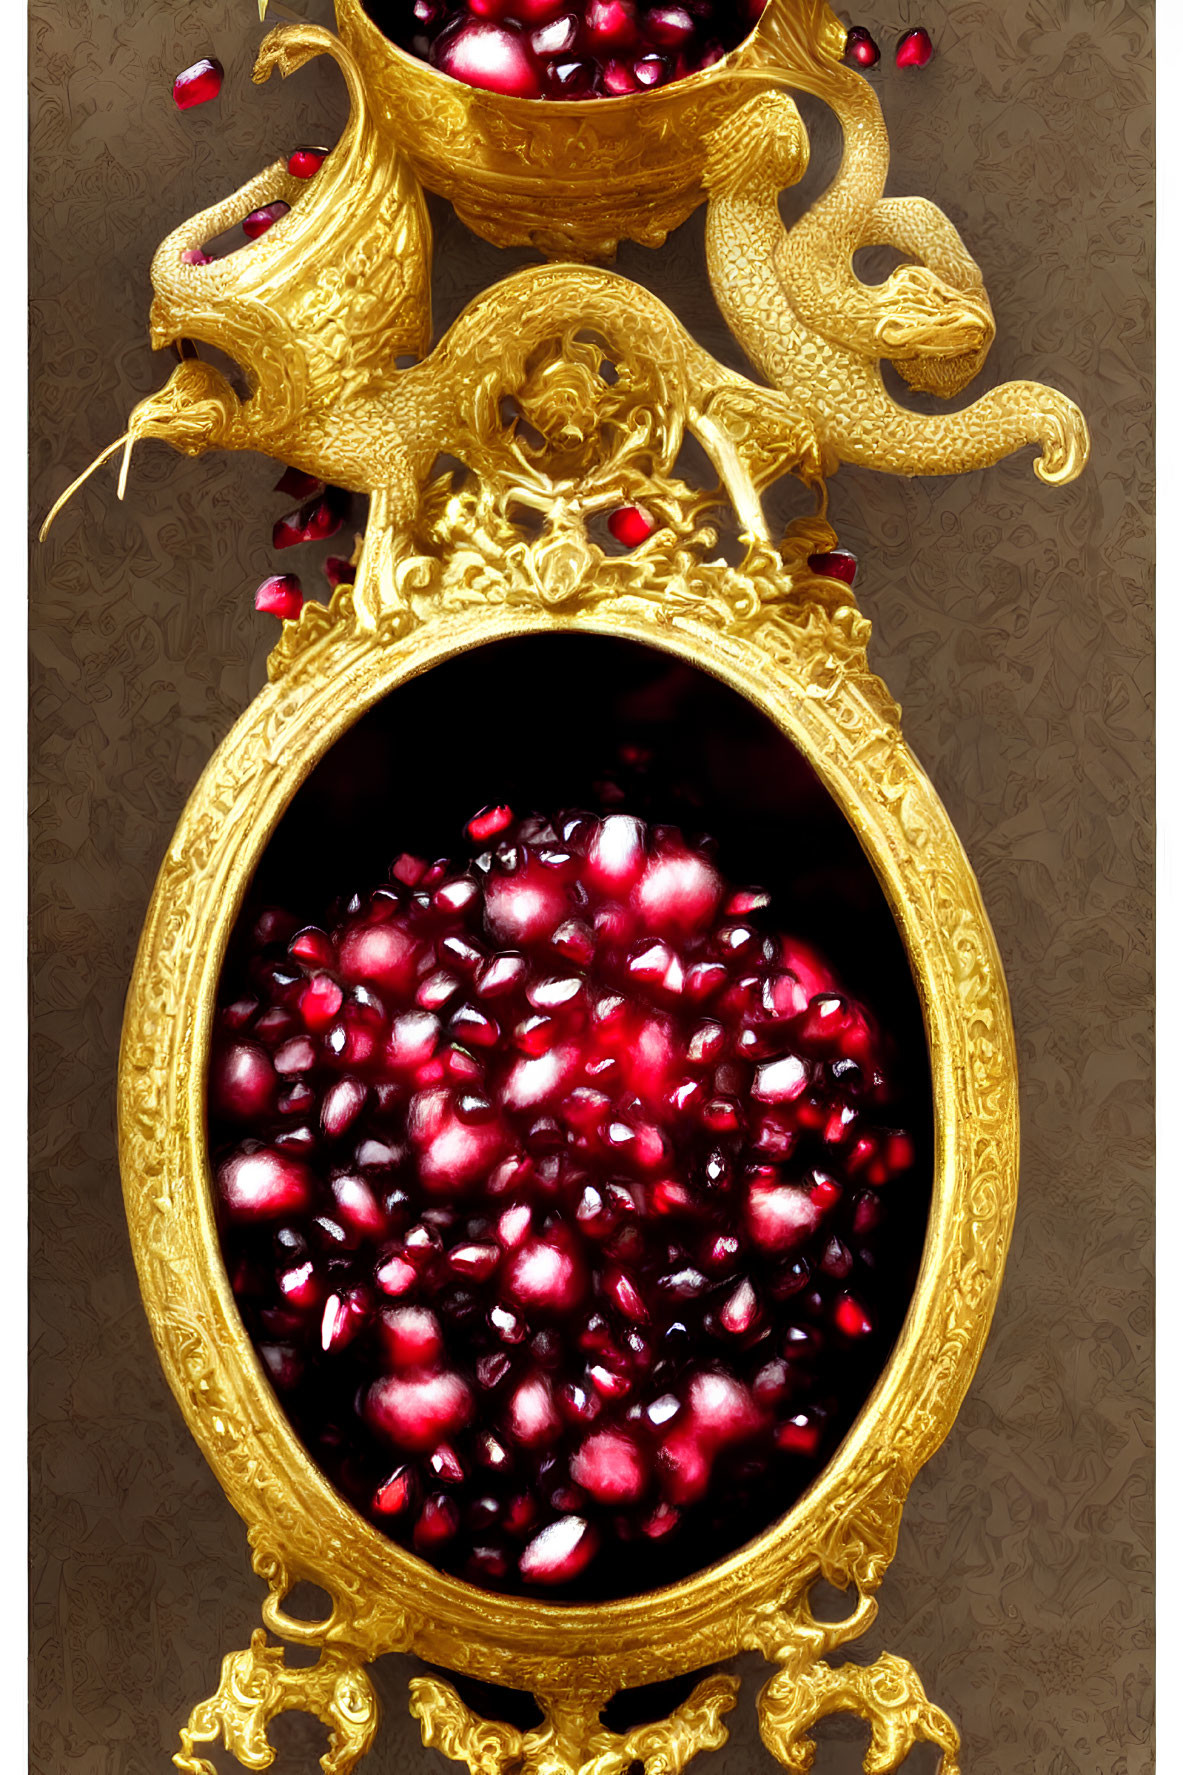 Golden Dragon Frame Mirror with Pomegranate Seeds Reflection